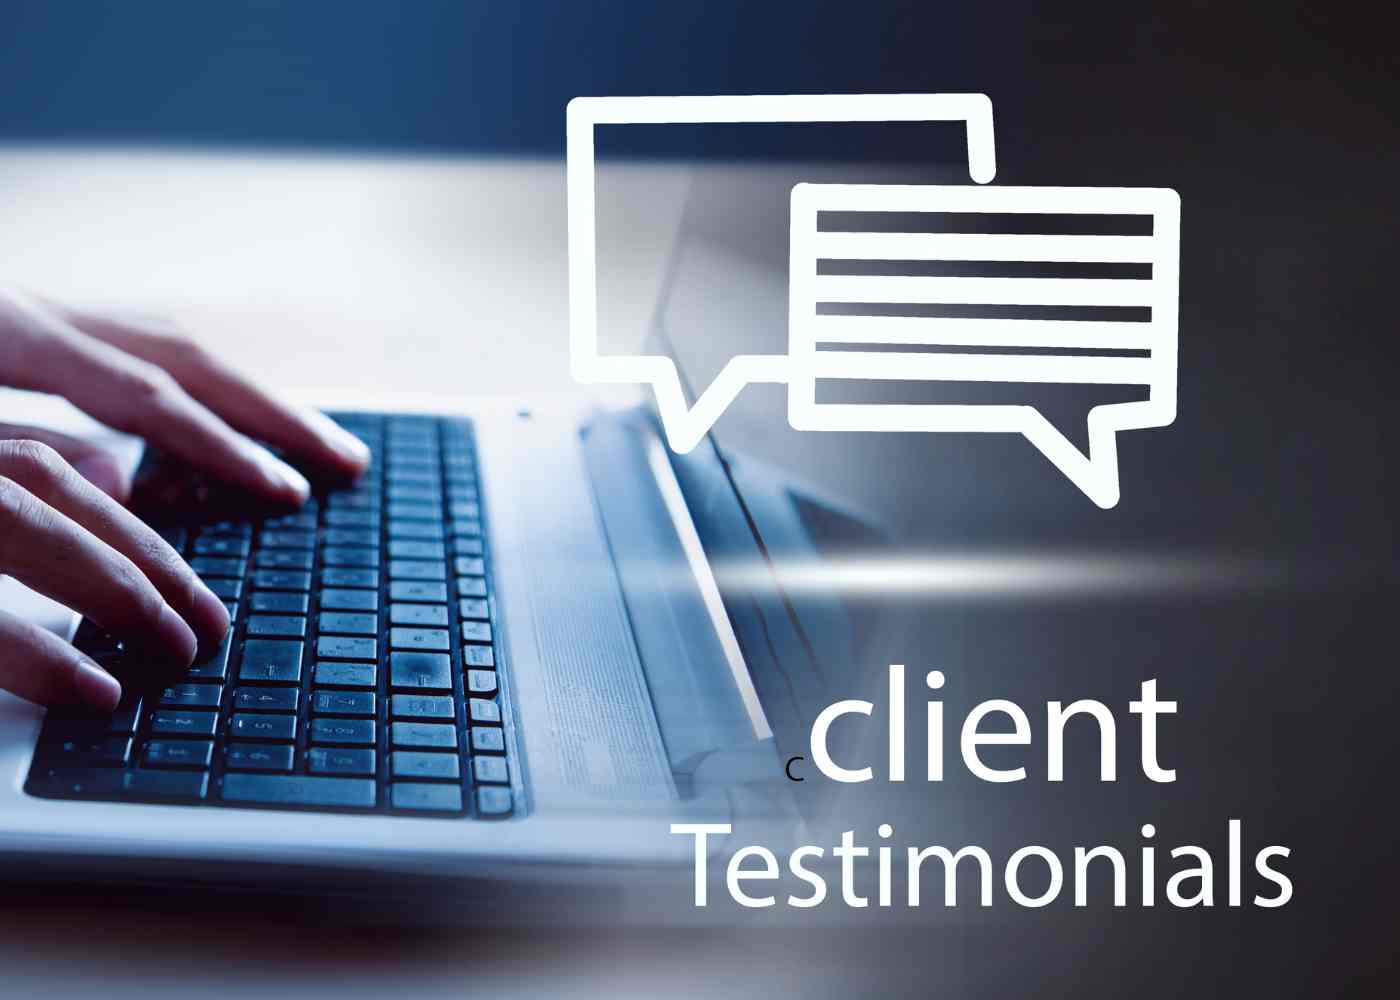 Testimonials and Web Design: A Winning Combination for Conversions